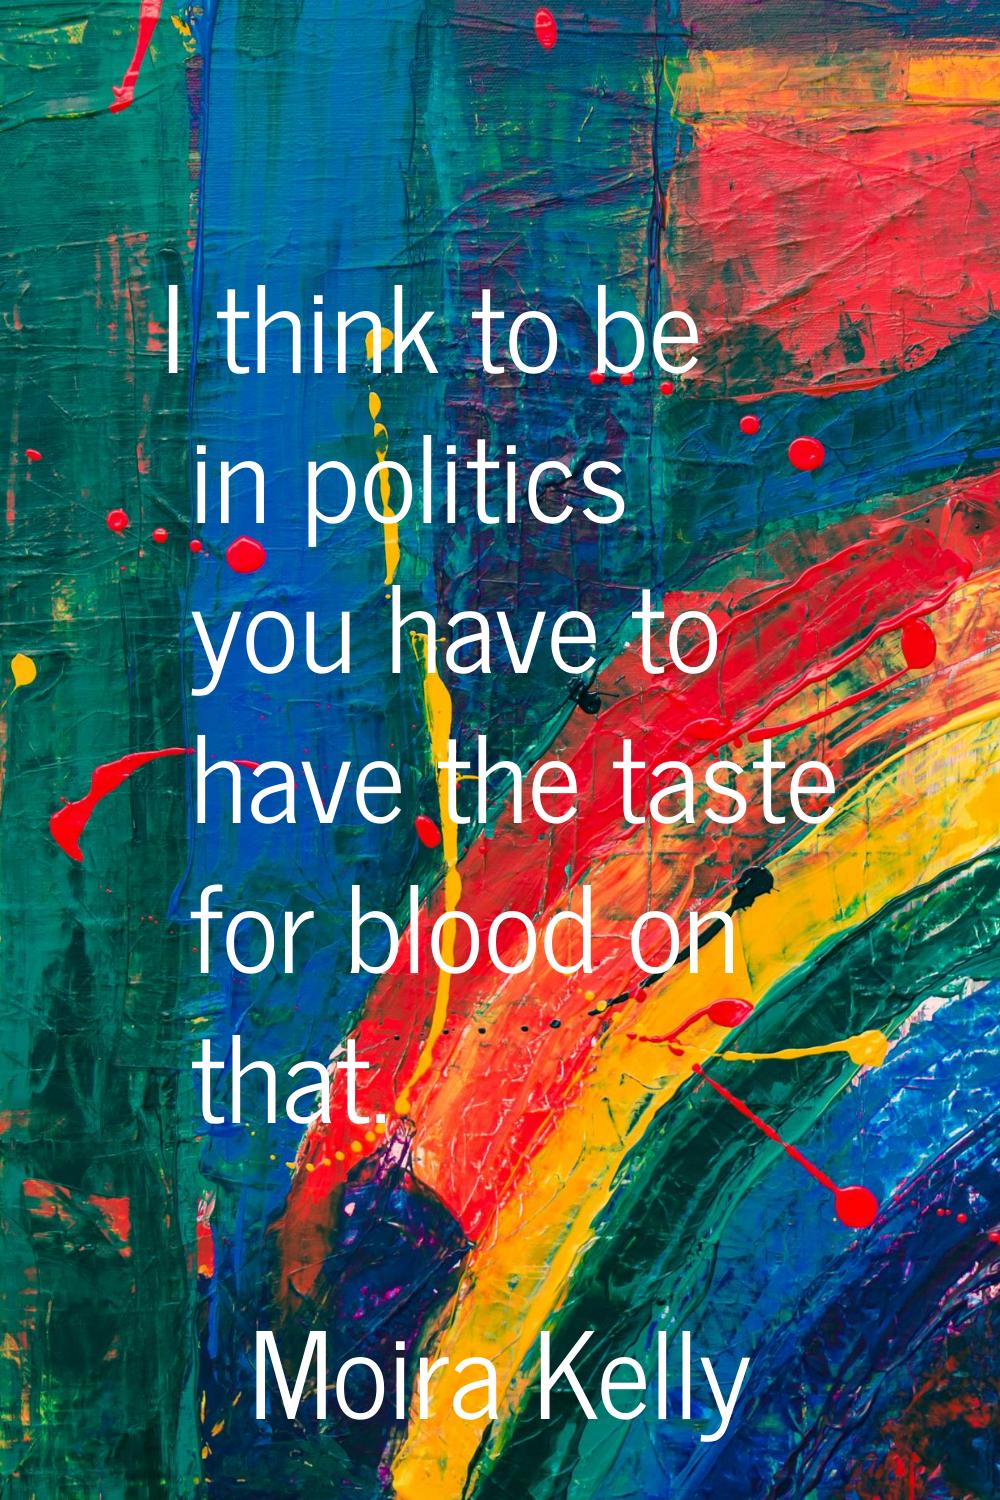 I think to be in politics you have to have the taste for blood on that.